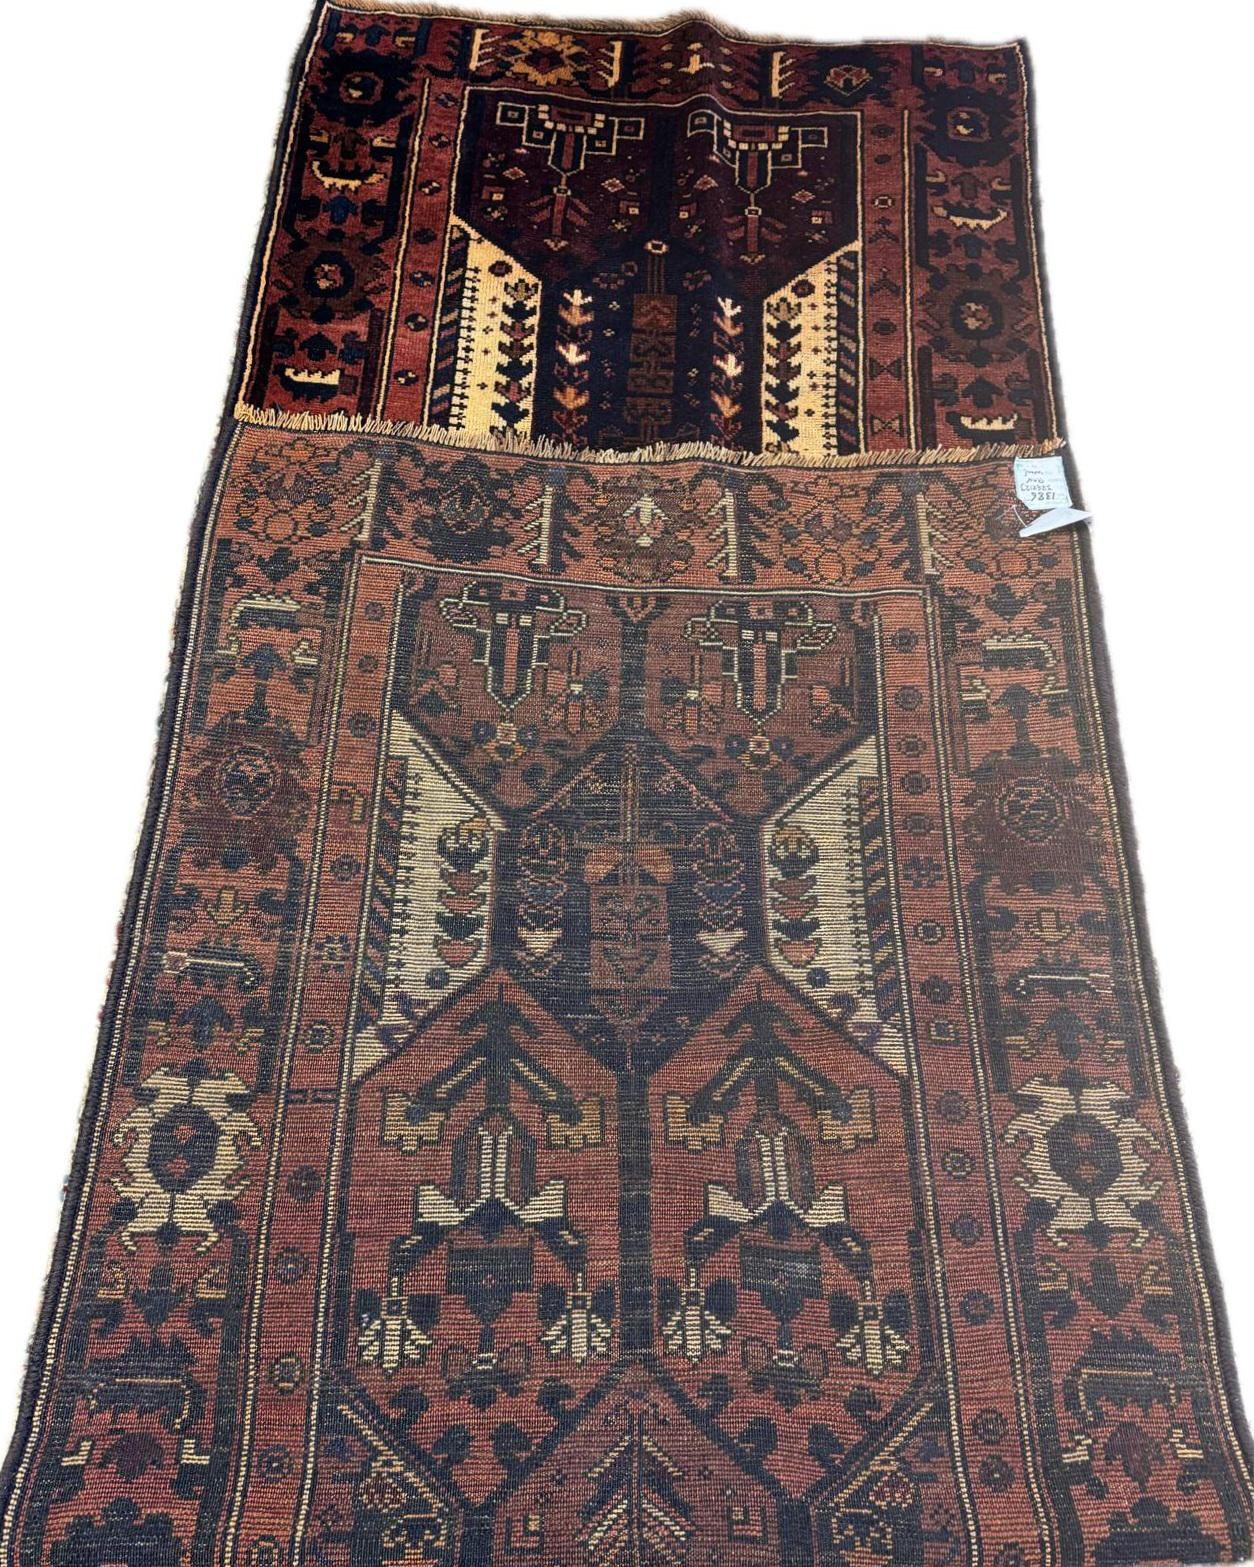 Immaculate 100+ Year Old Lori

4' x 12' 

This beautiful rust toned runner was handwoven by the Lores, one of the most renowned rug weaving tribes of Persia. The Bakhtiari trace their lineage back to the Lores, and this piece does a great job of